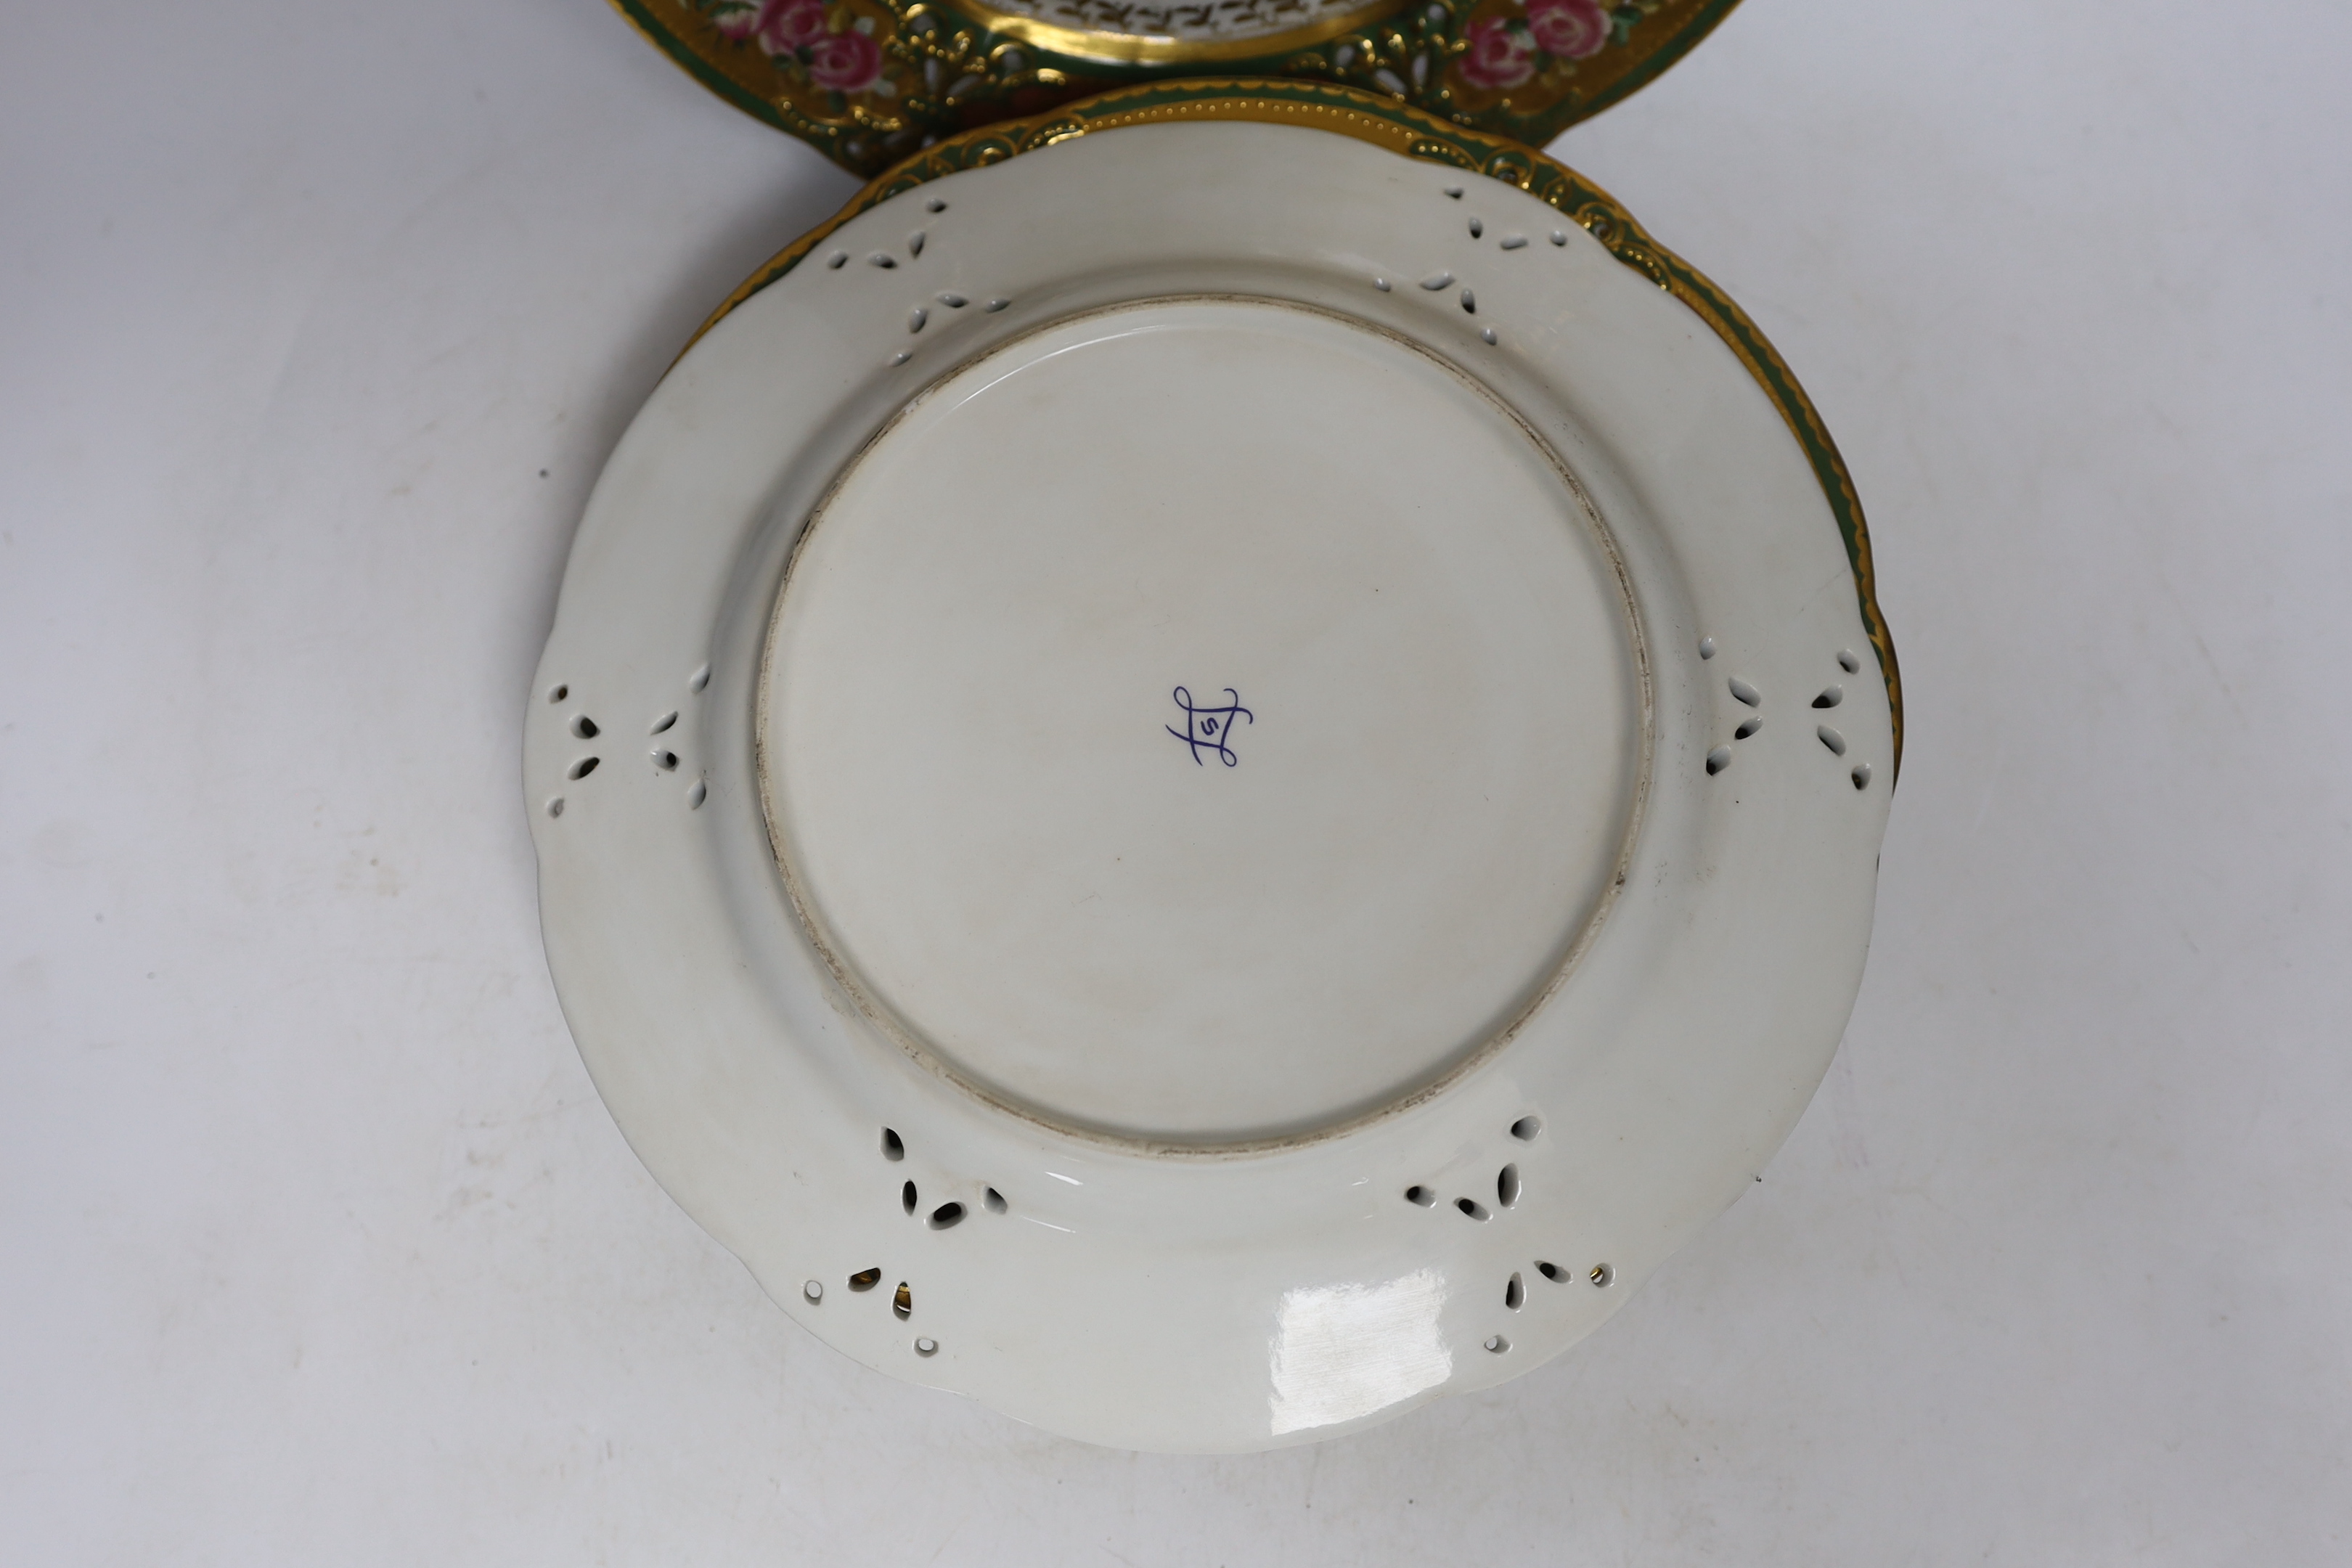 A set of six floral Sevres-style dessert plates